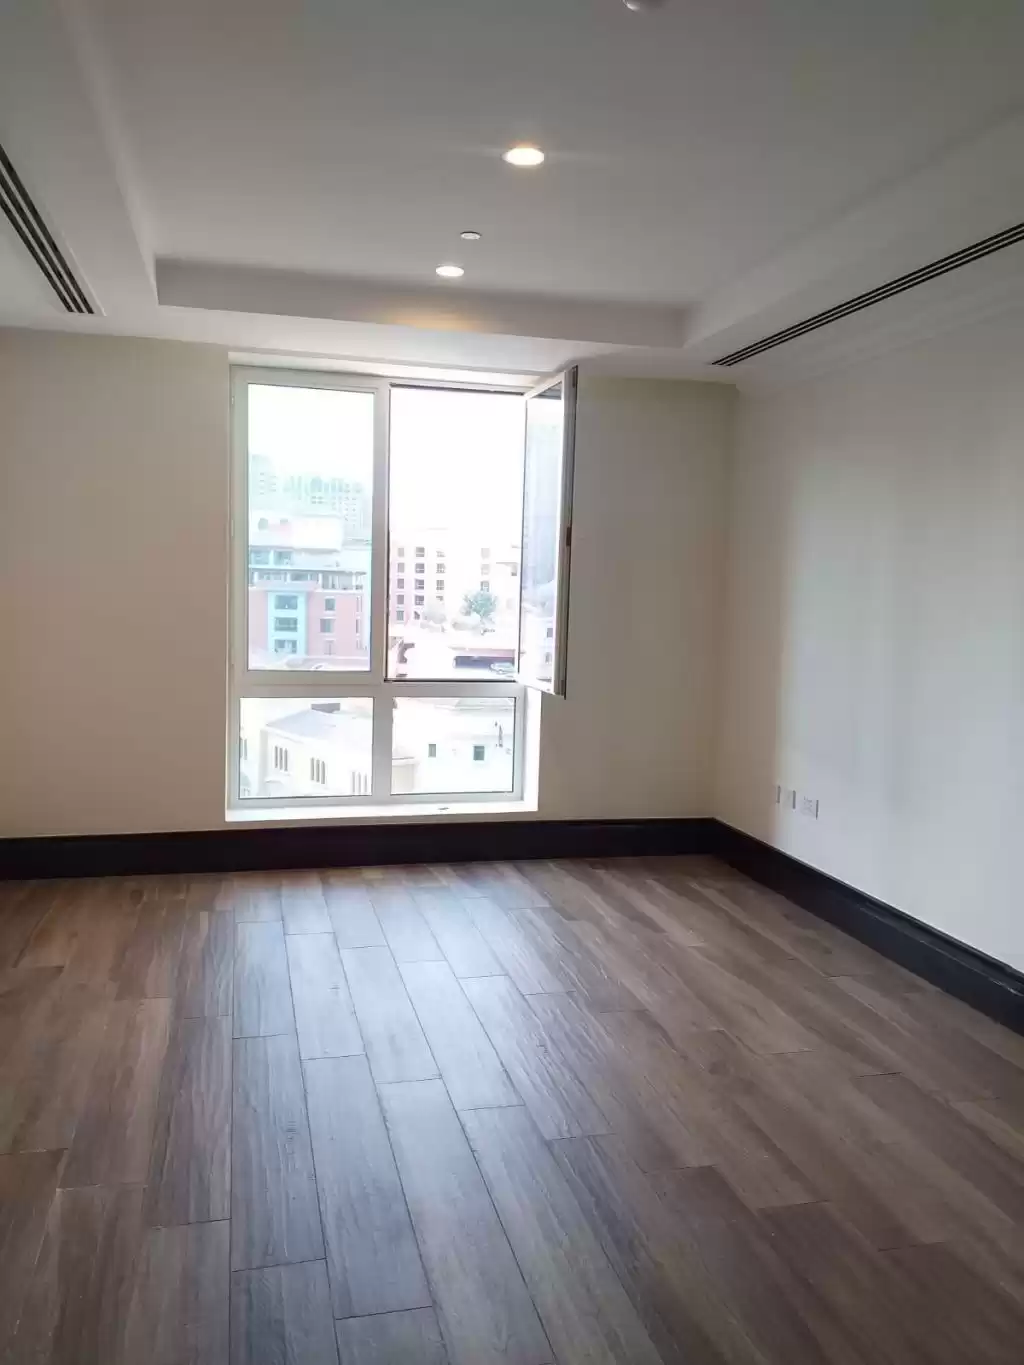 Residential Ready Property 1 Bedroom S/F Apartment  for rent in Al Sadd , Doha #16138 - 1  image 